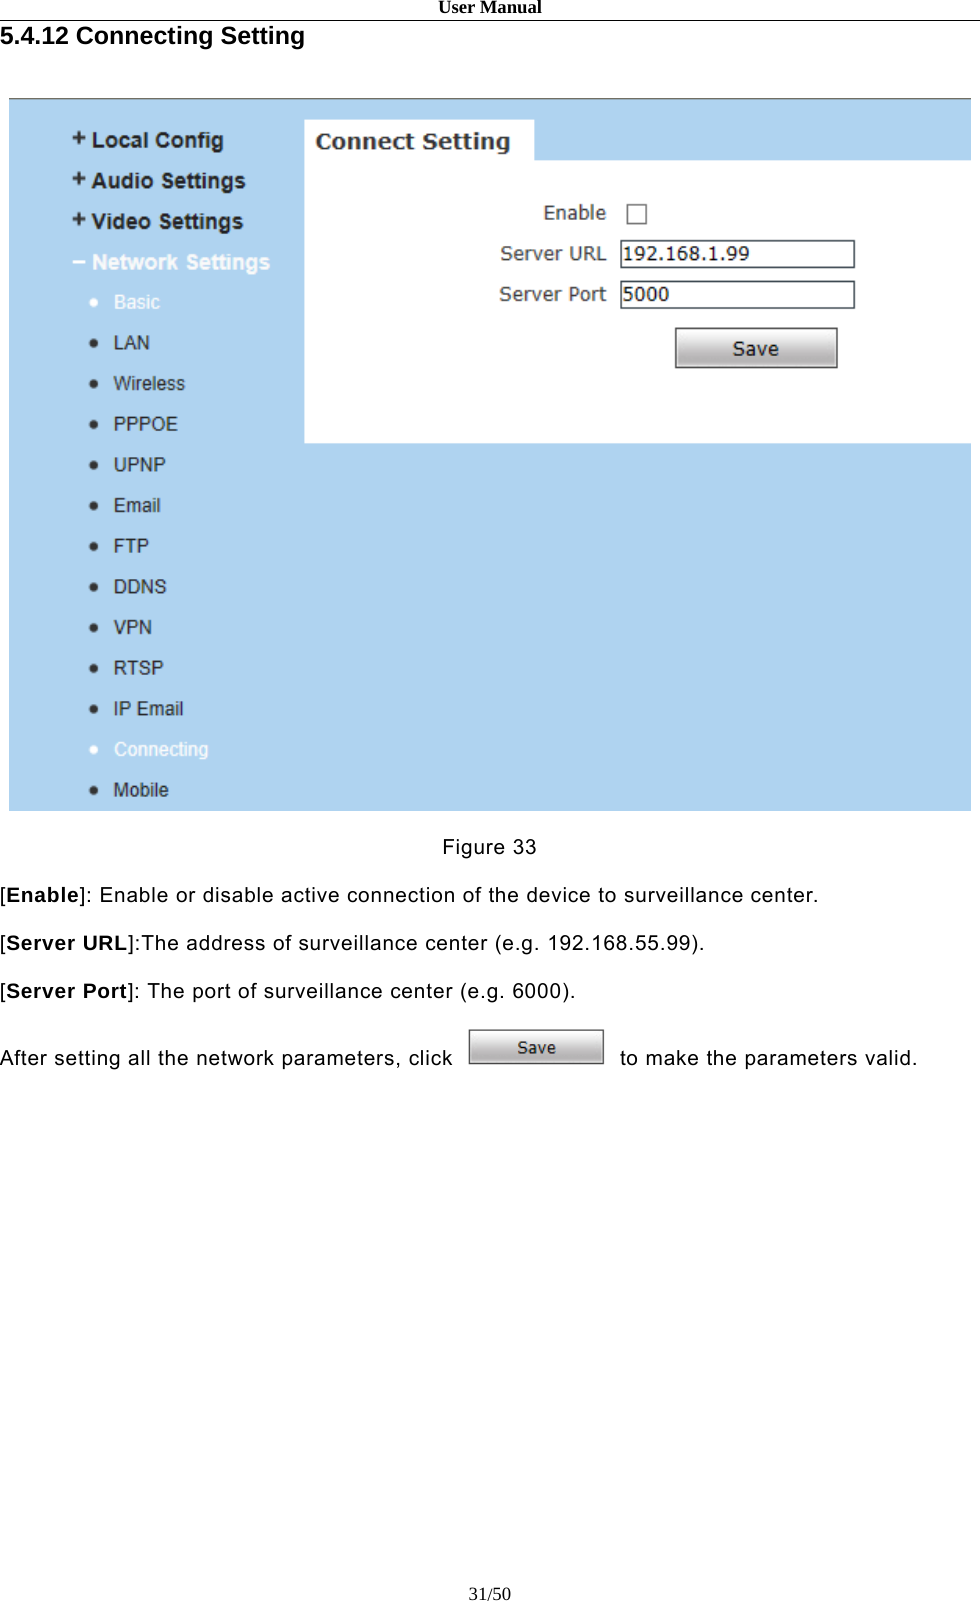 User Manual31/505.4.12 Connecting SettingFigure 33[Enable]: Enable or disable active connection of the device to surveillance center.[Server URL]:The address of surveillance center (e.g. 192.168.55.99).[Server Port]: The port of surveillance center (e.g. 6000).After setting all the network parameters, click to make the parameters valid.